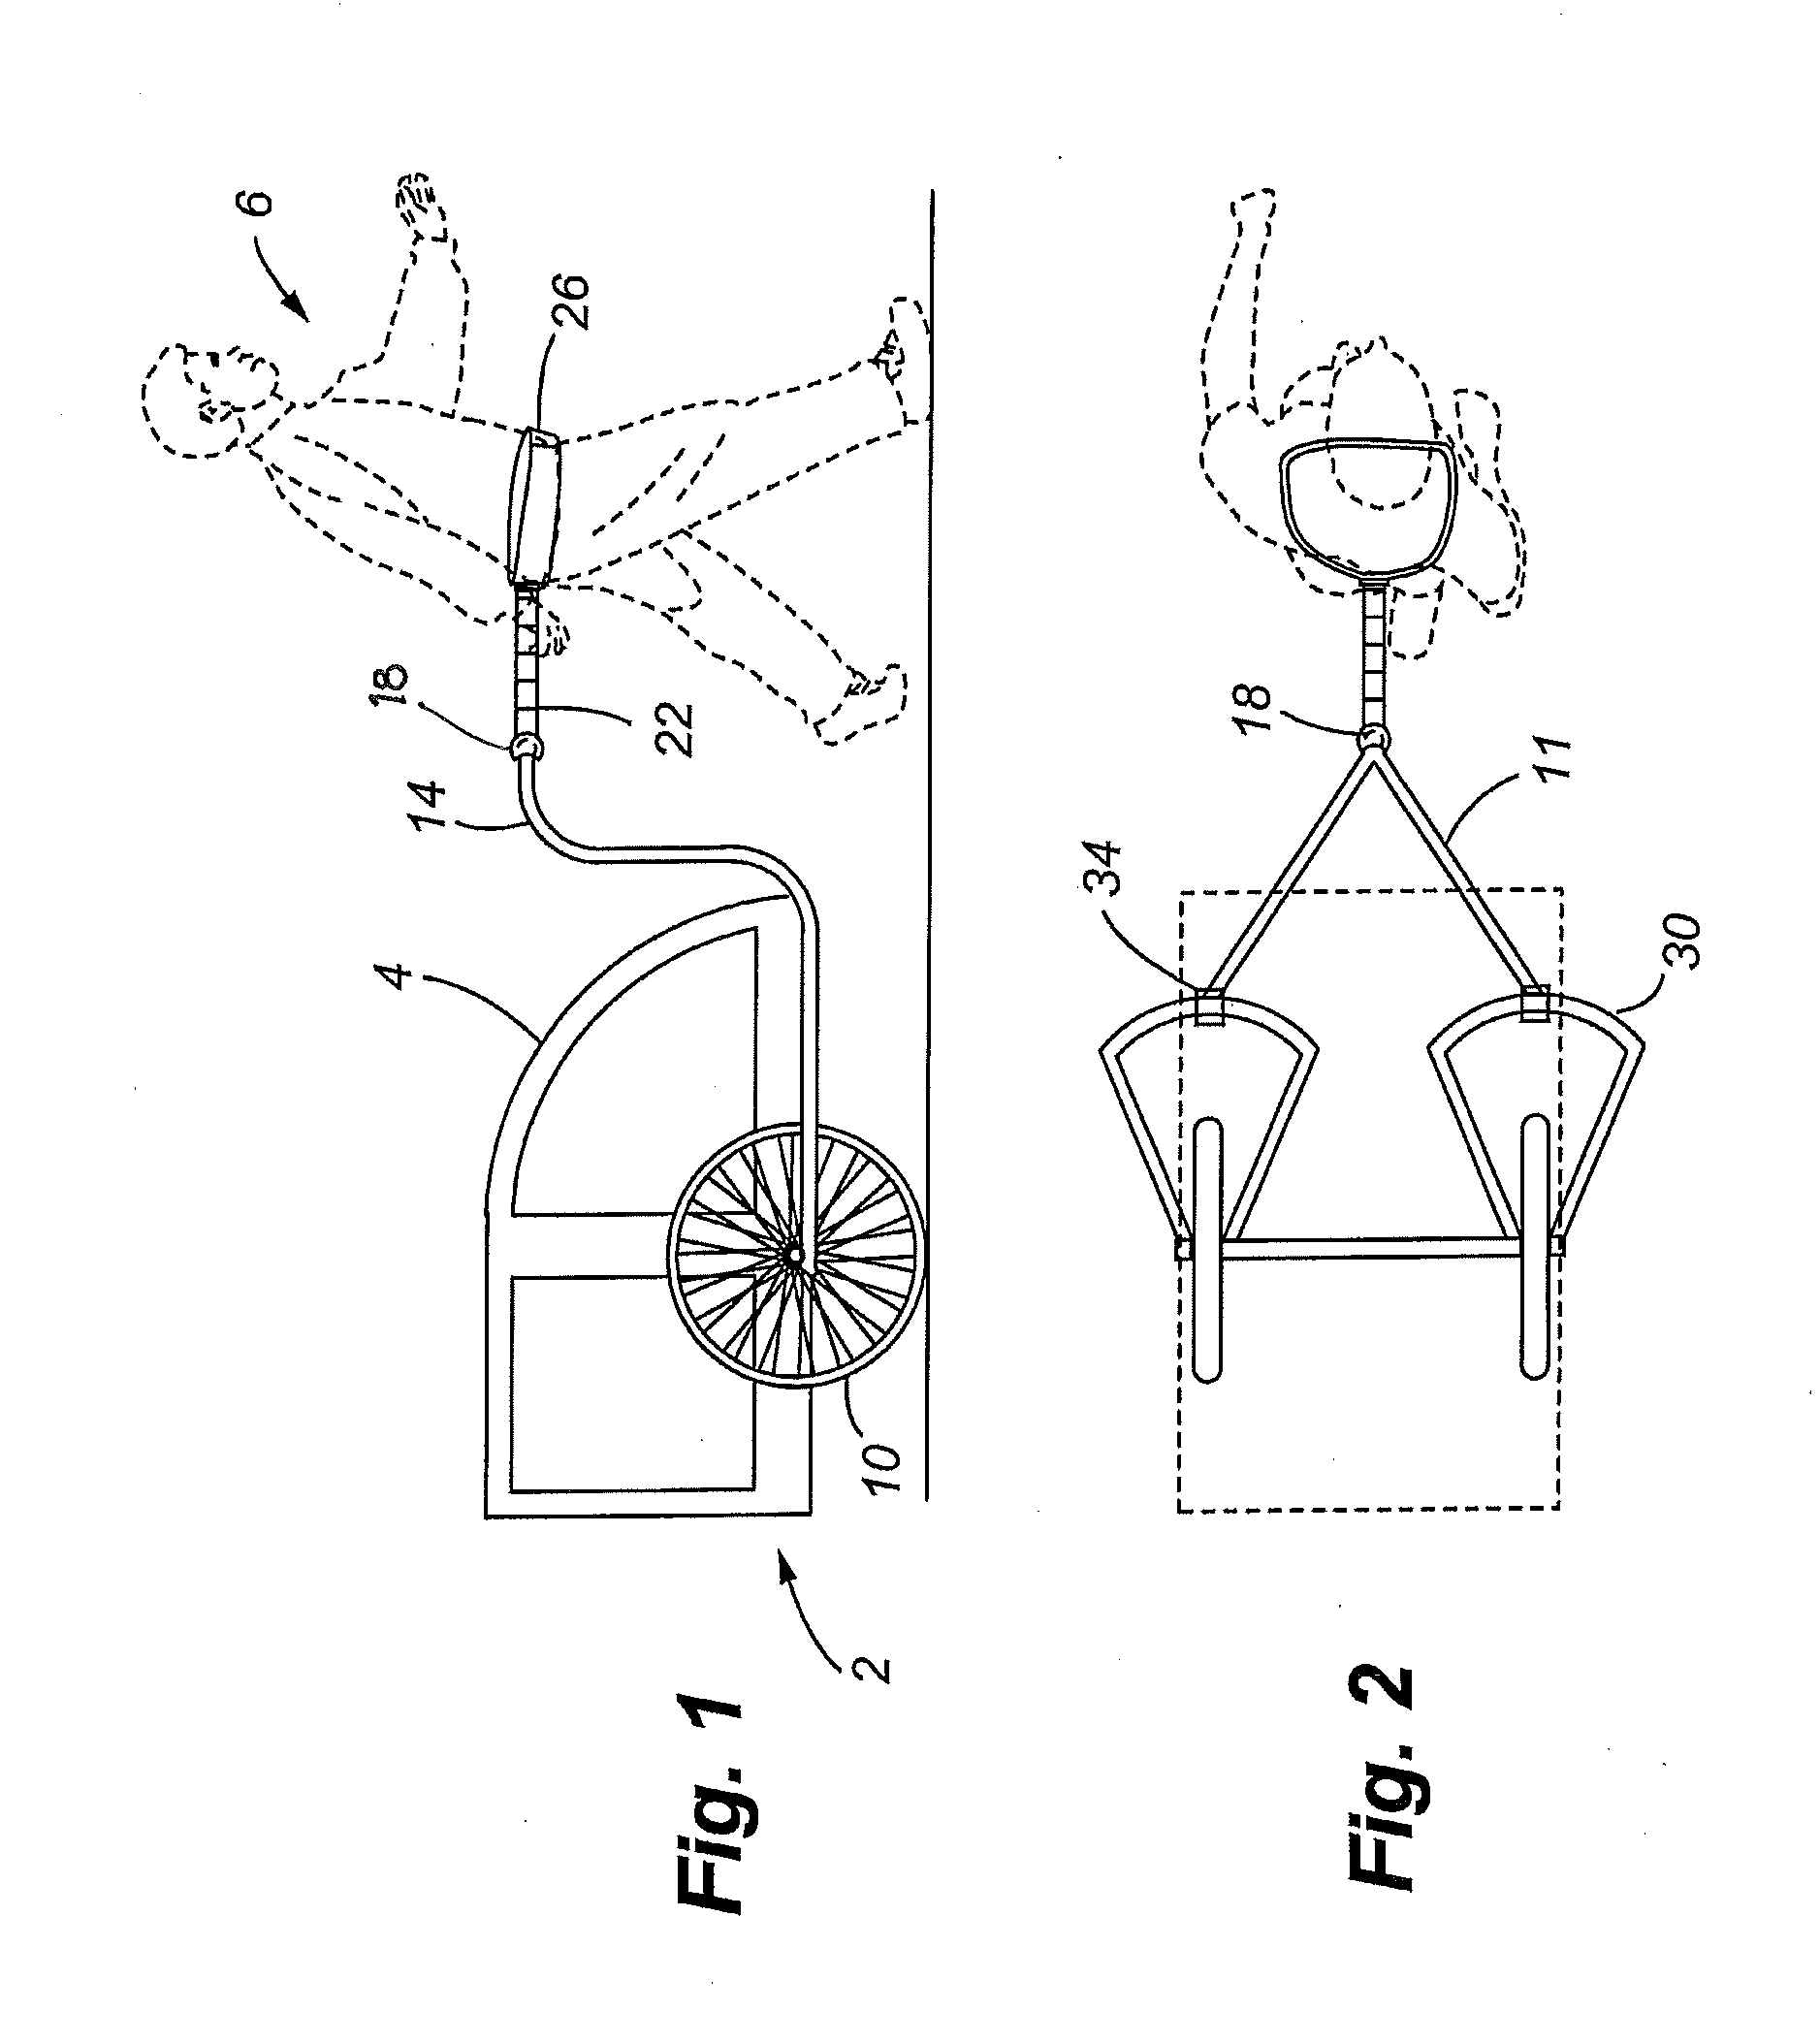 Carriage and incorporated harness with damping mechanisms for improved towing and stability of the carriage